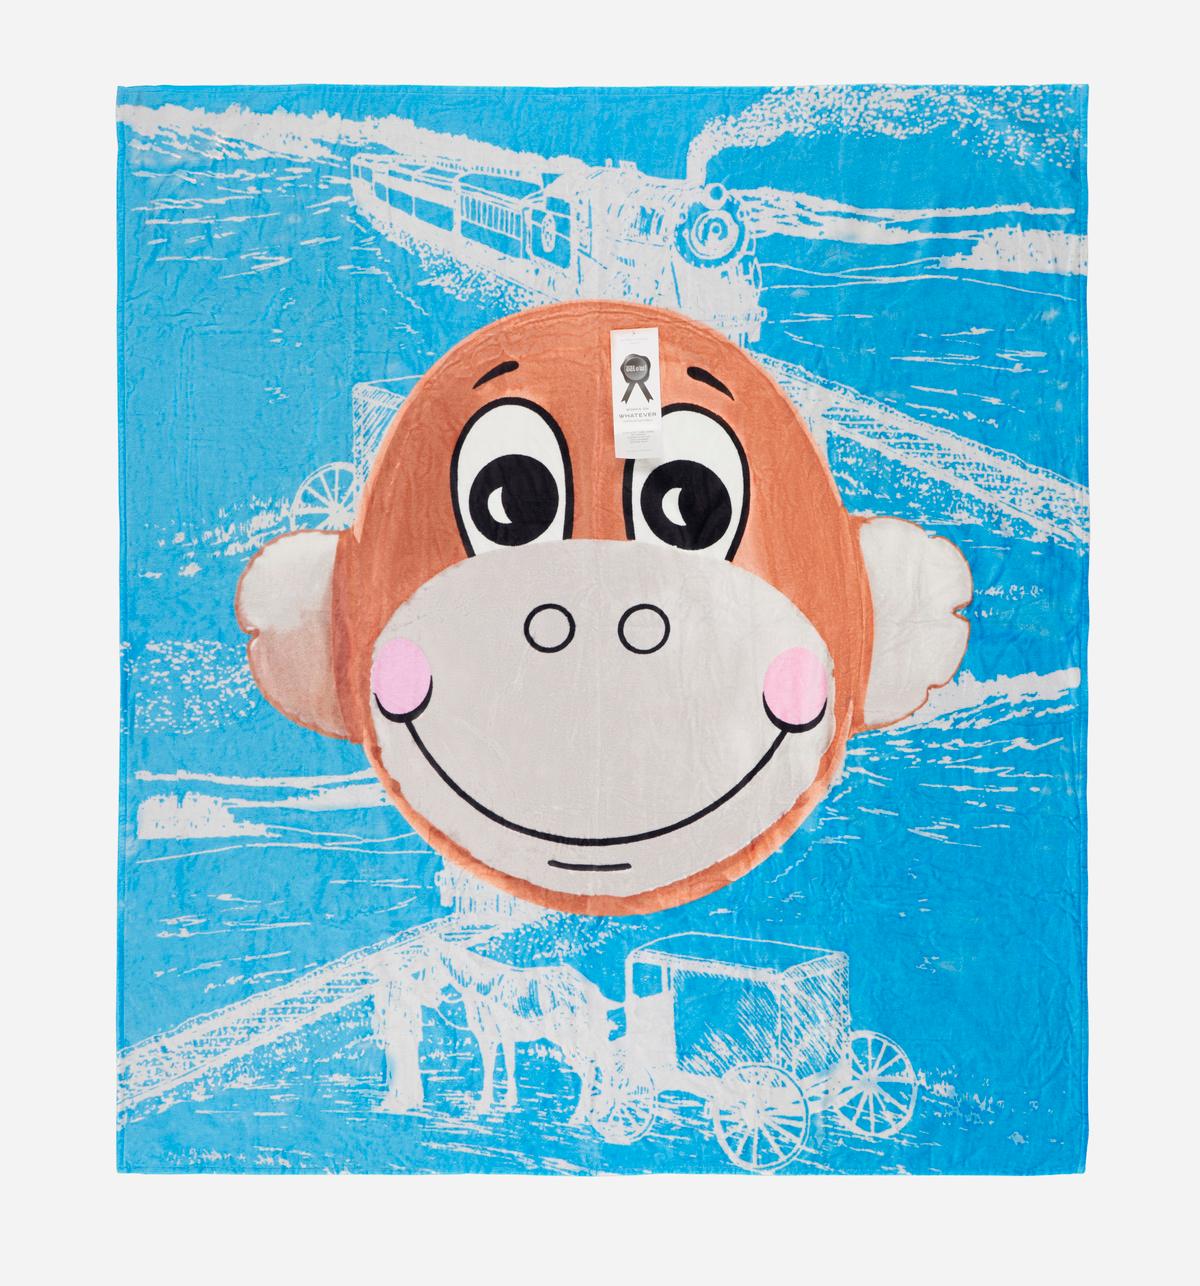 Jeff Koons Monkey Train beach towel 2008:
A highly decorative limited edition 2008 Jeff Koons Monkey Train towel. Measuring 70x60 inches - this work would look outstanding framed. 

This outstanding Jeff Koons Monkey Train collectible was published